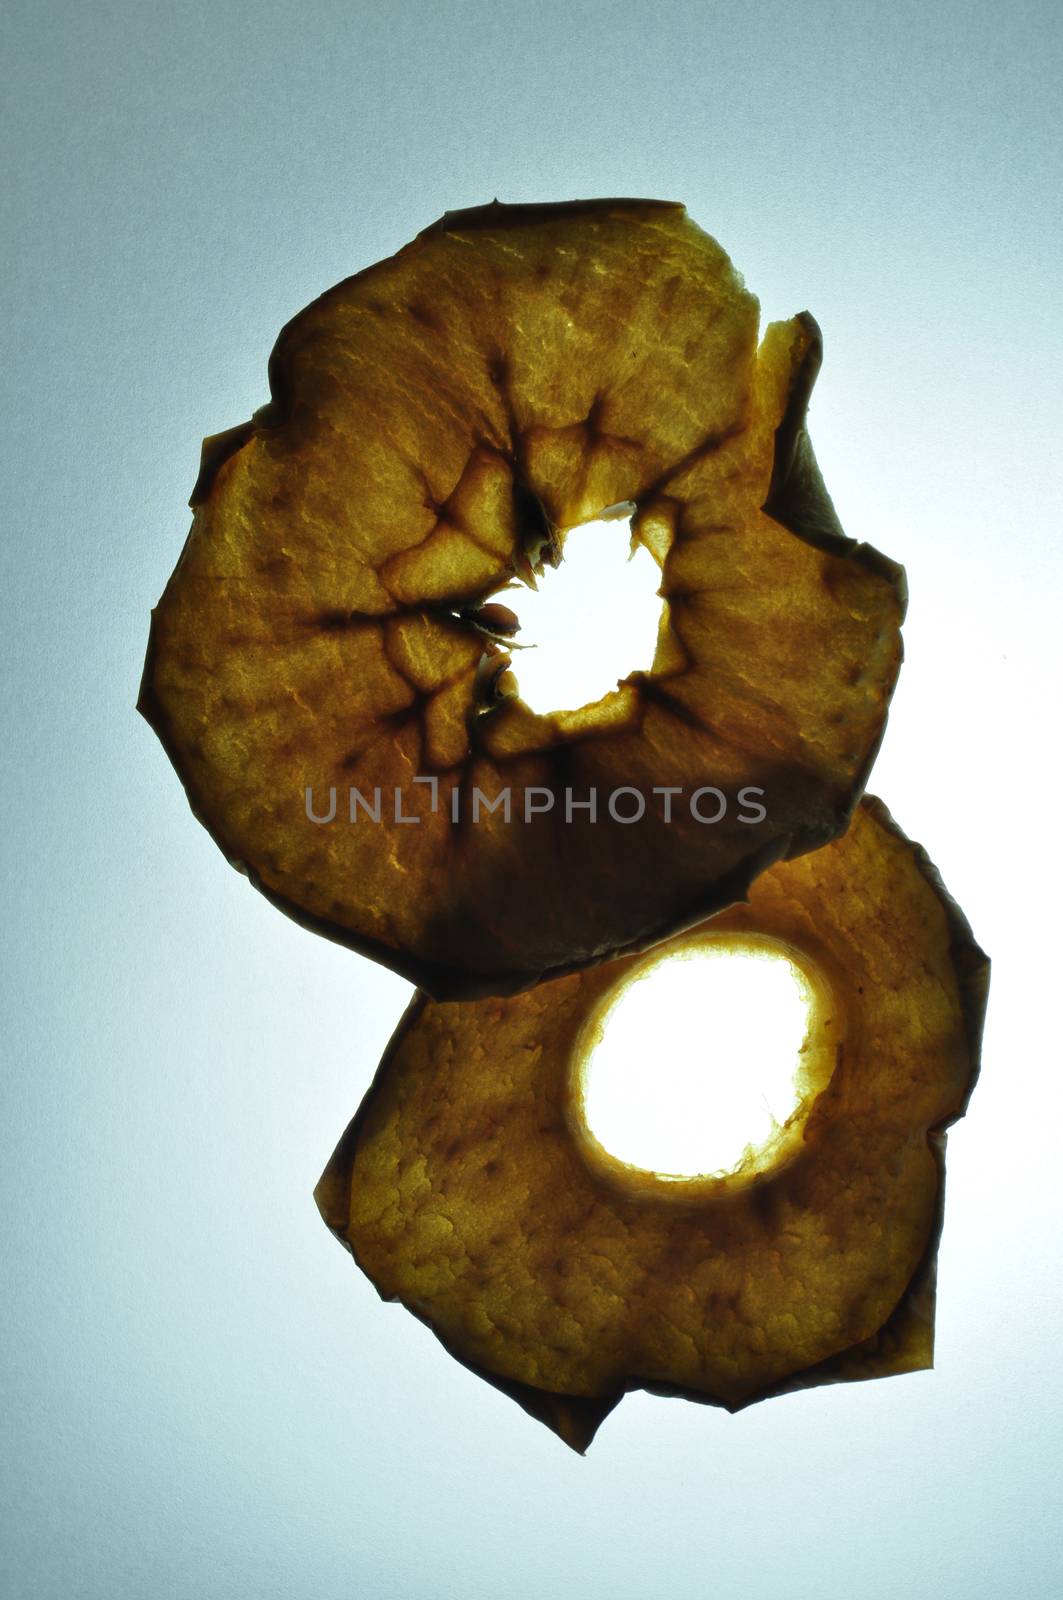 Dried sliced apple in silhouette on lighting desk - the difference detail of dried apple